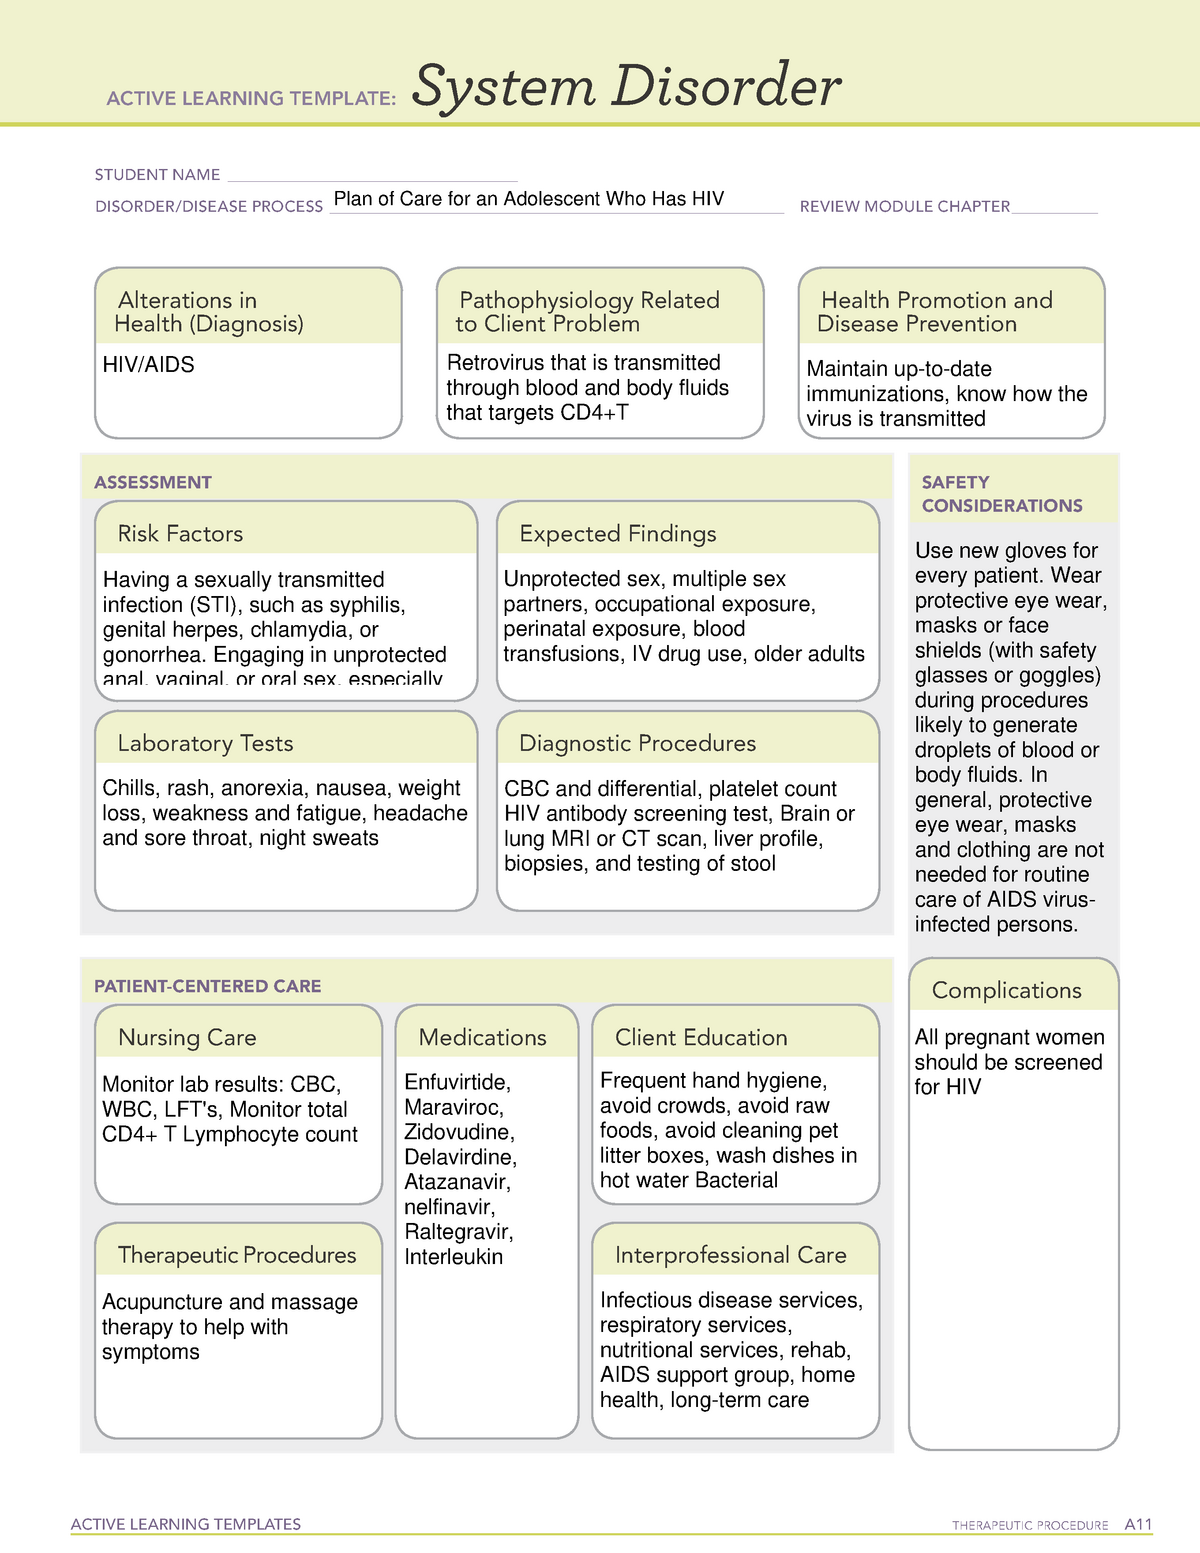 HIV System Disorder Cms template for peds - ACTIVE LEARNING TEMPLATES ...